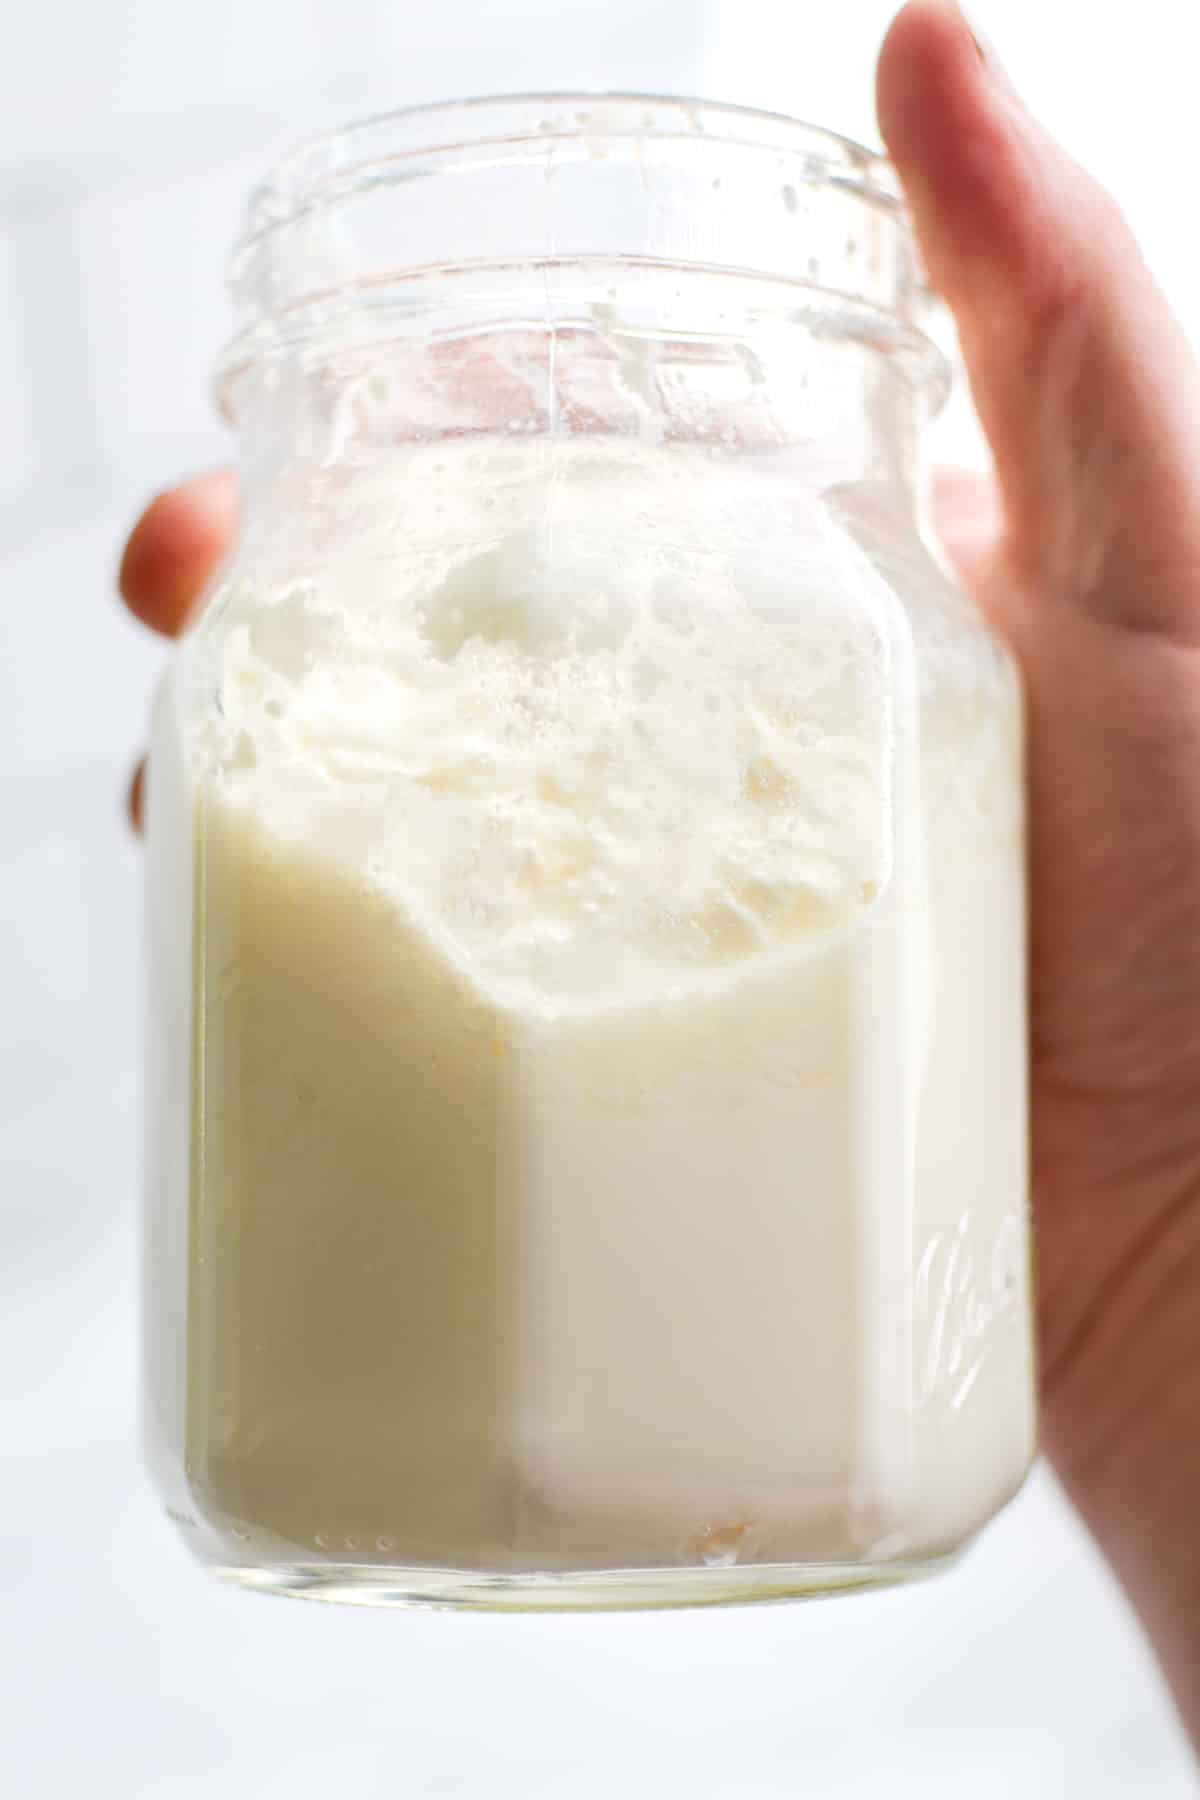 A jar of thickened milk.